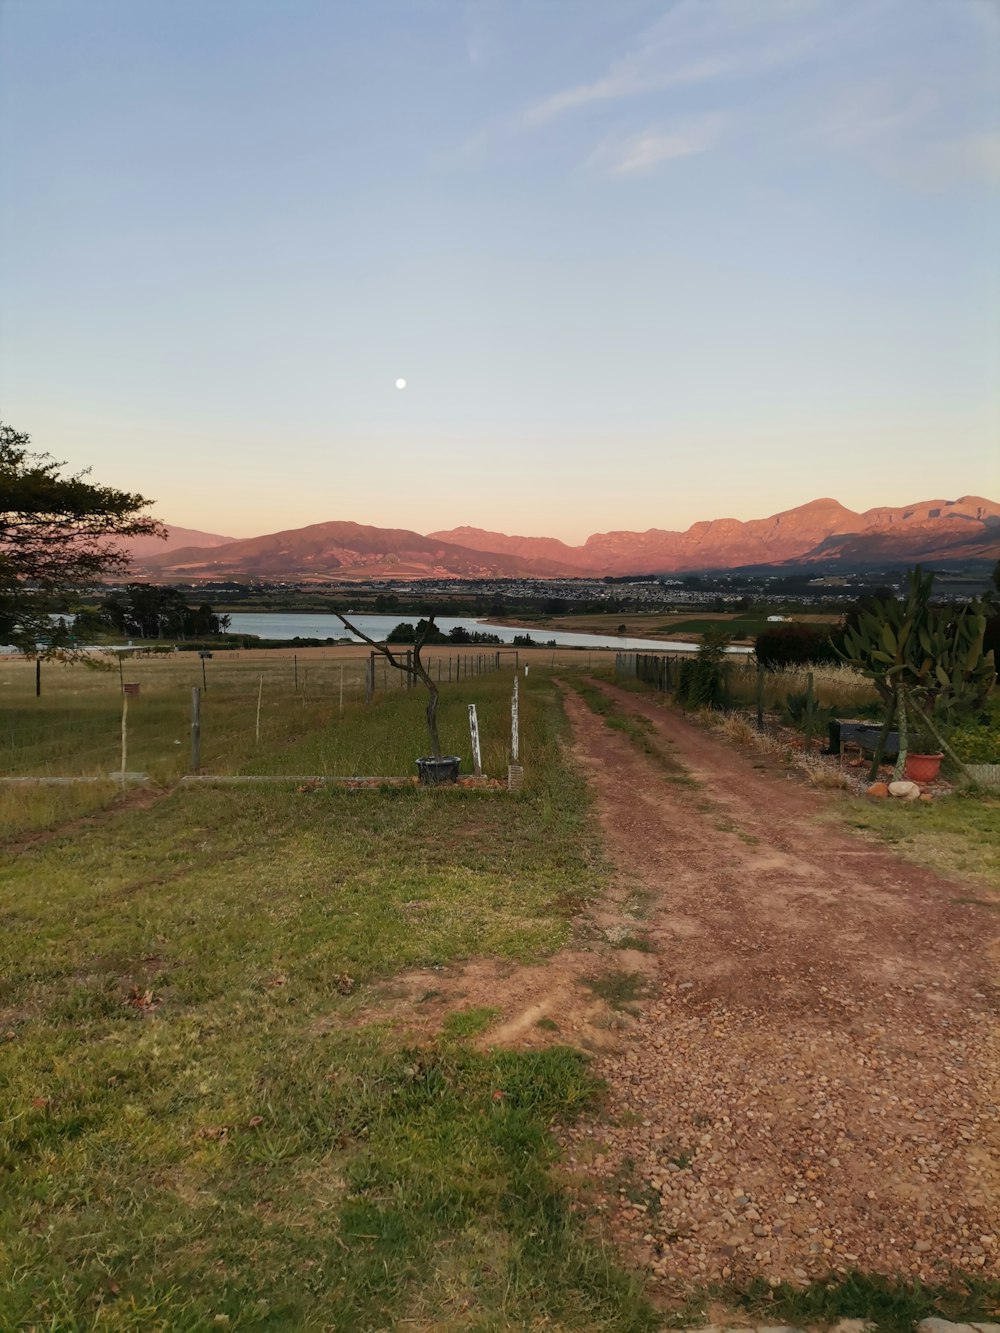 a dirt road in a field with mountains in the background